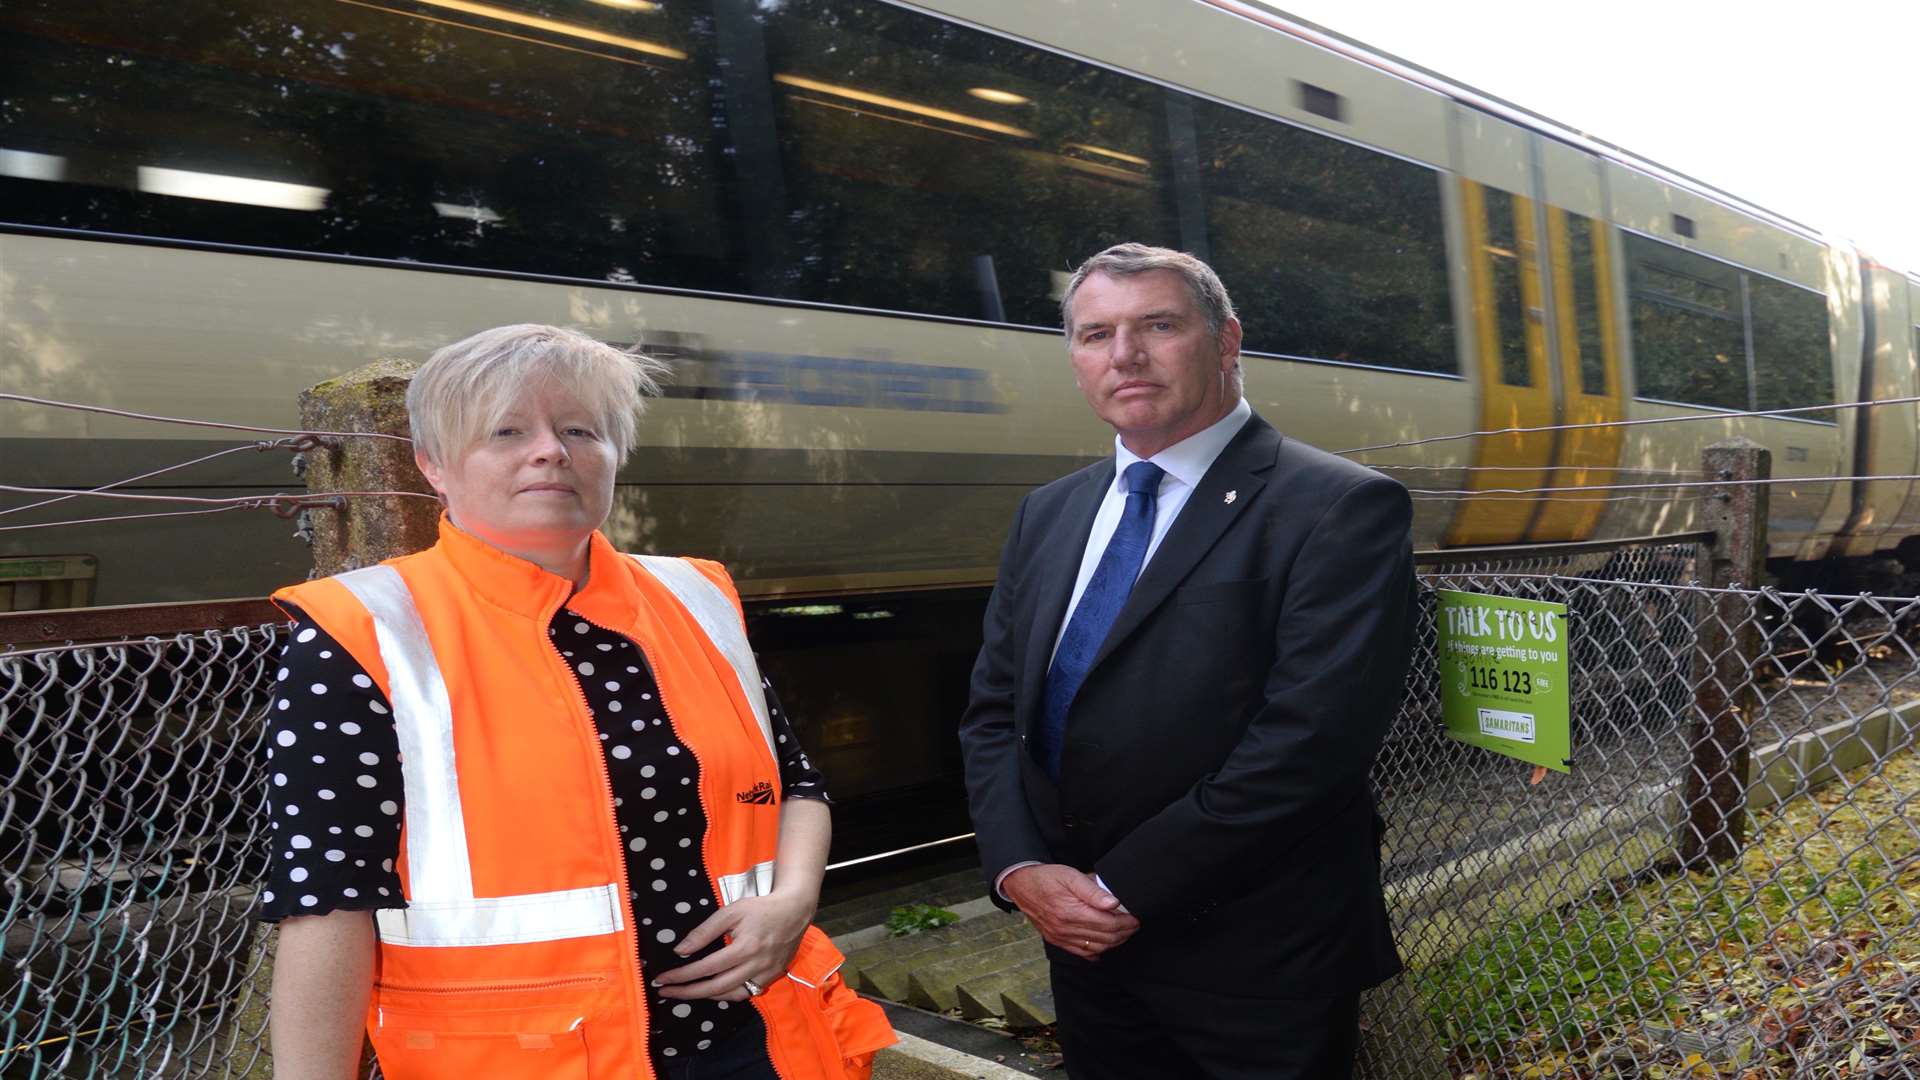 Nicola Dooris, Network Rail's community safety officer and Cllr Mike Whiting at the crossing